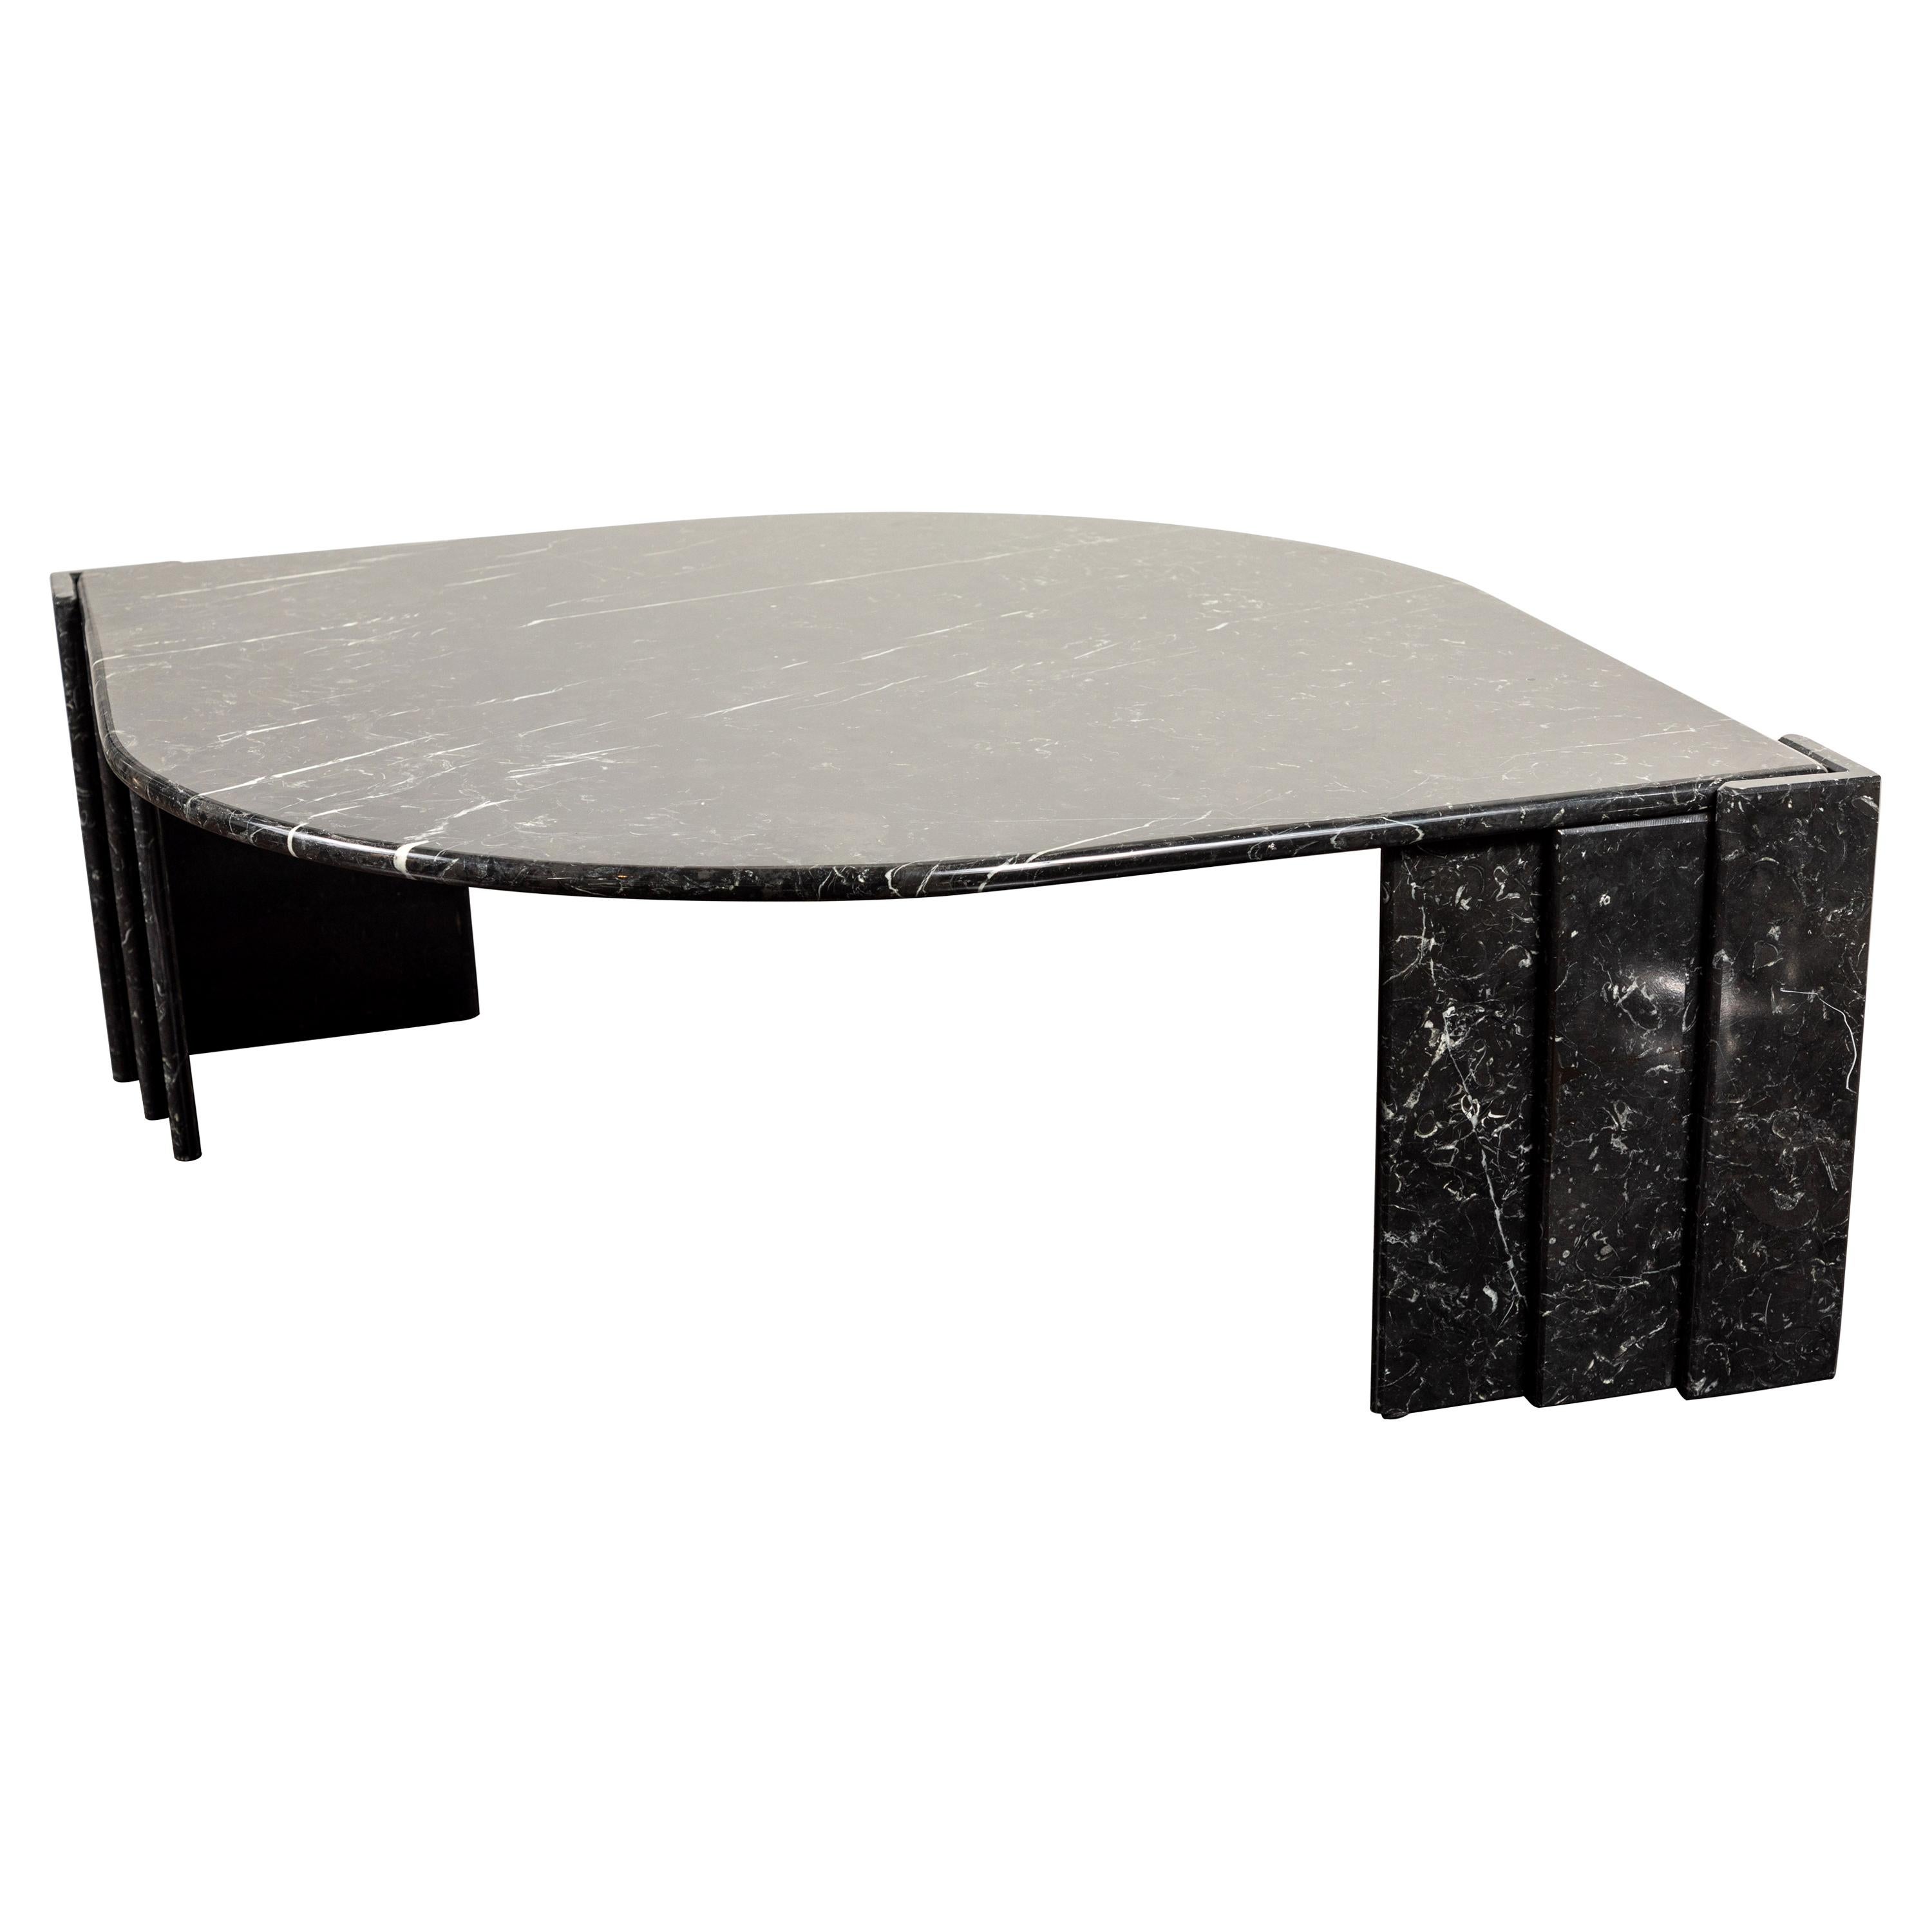 Sophisticated Italian black marble coffee table, 1980s. The top of the table is teardrop-shaped and is supported by two faceted plinth bases on either end. The marble displays subtle white veining throughout. Excellent condition.